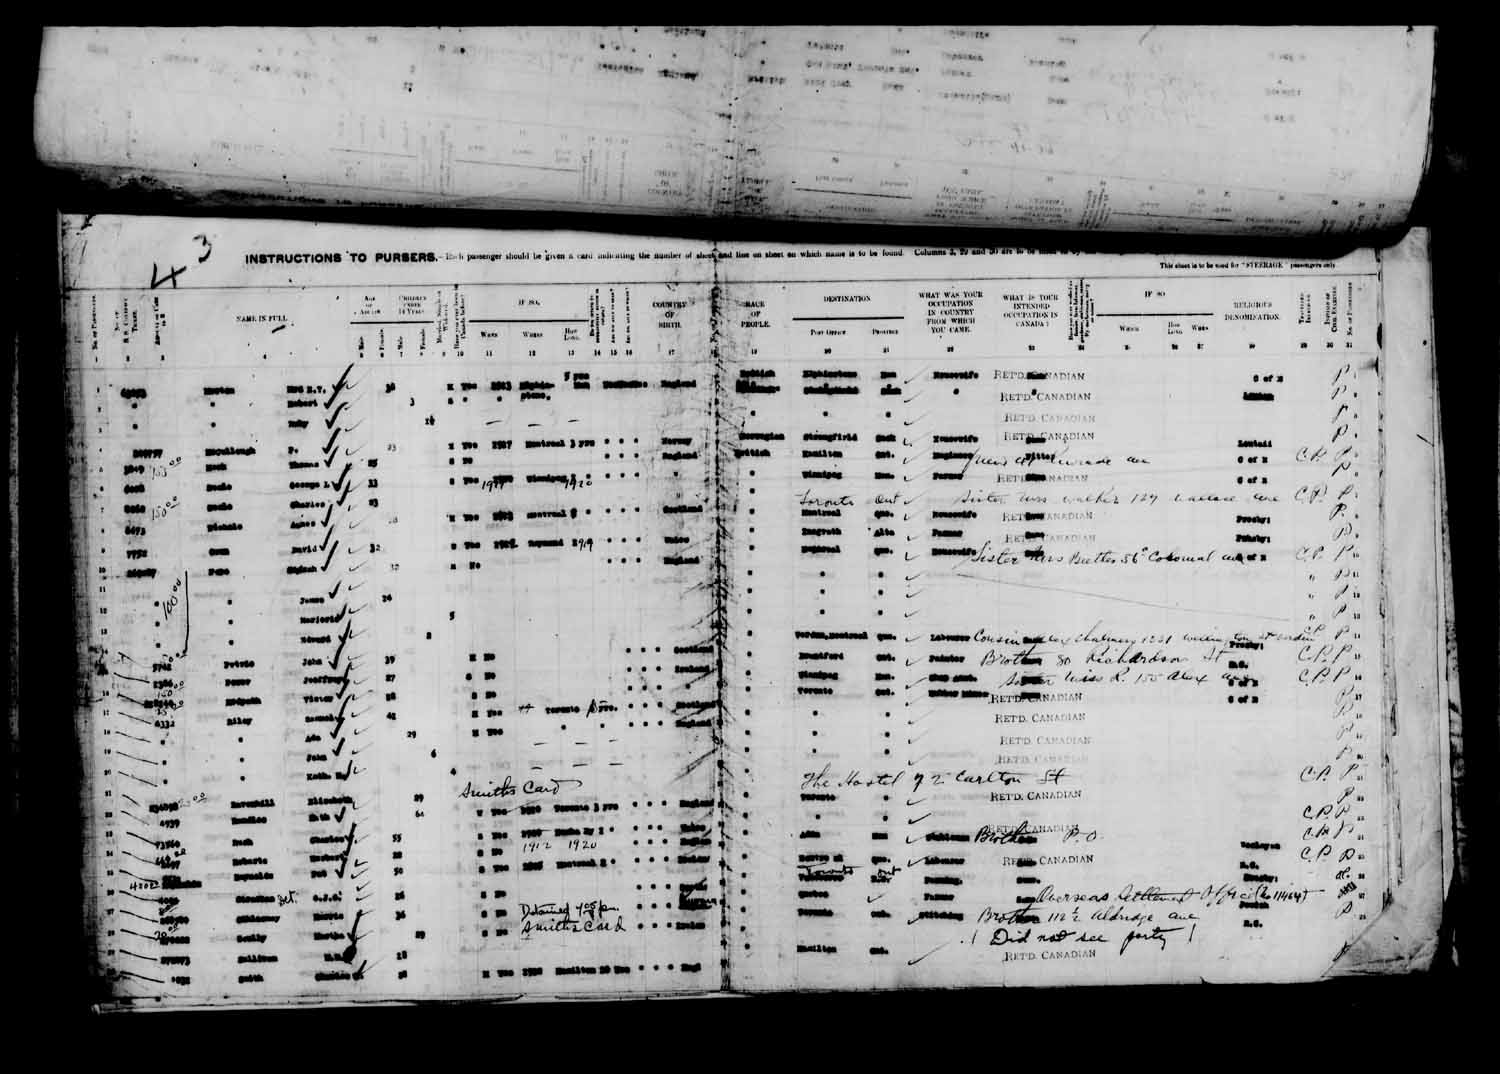 Digitized page of Passenger Lists for Image No.: e003610670